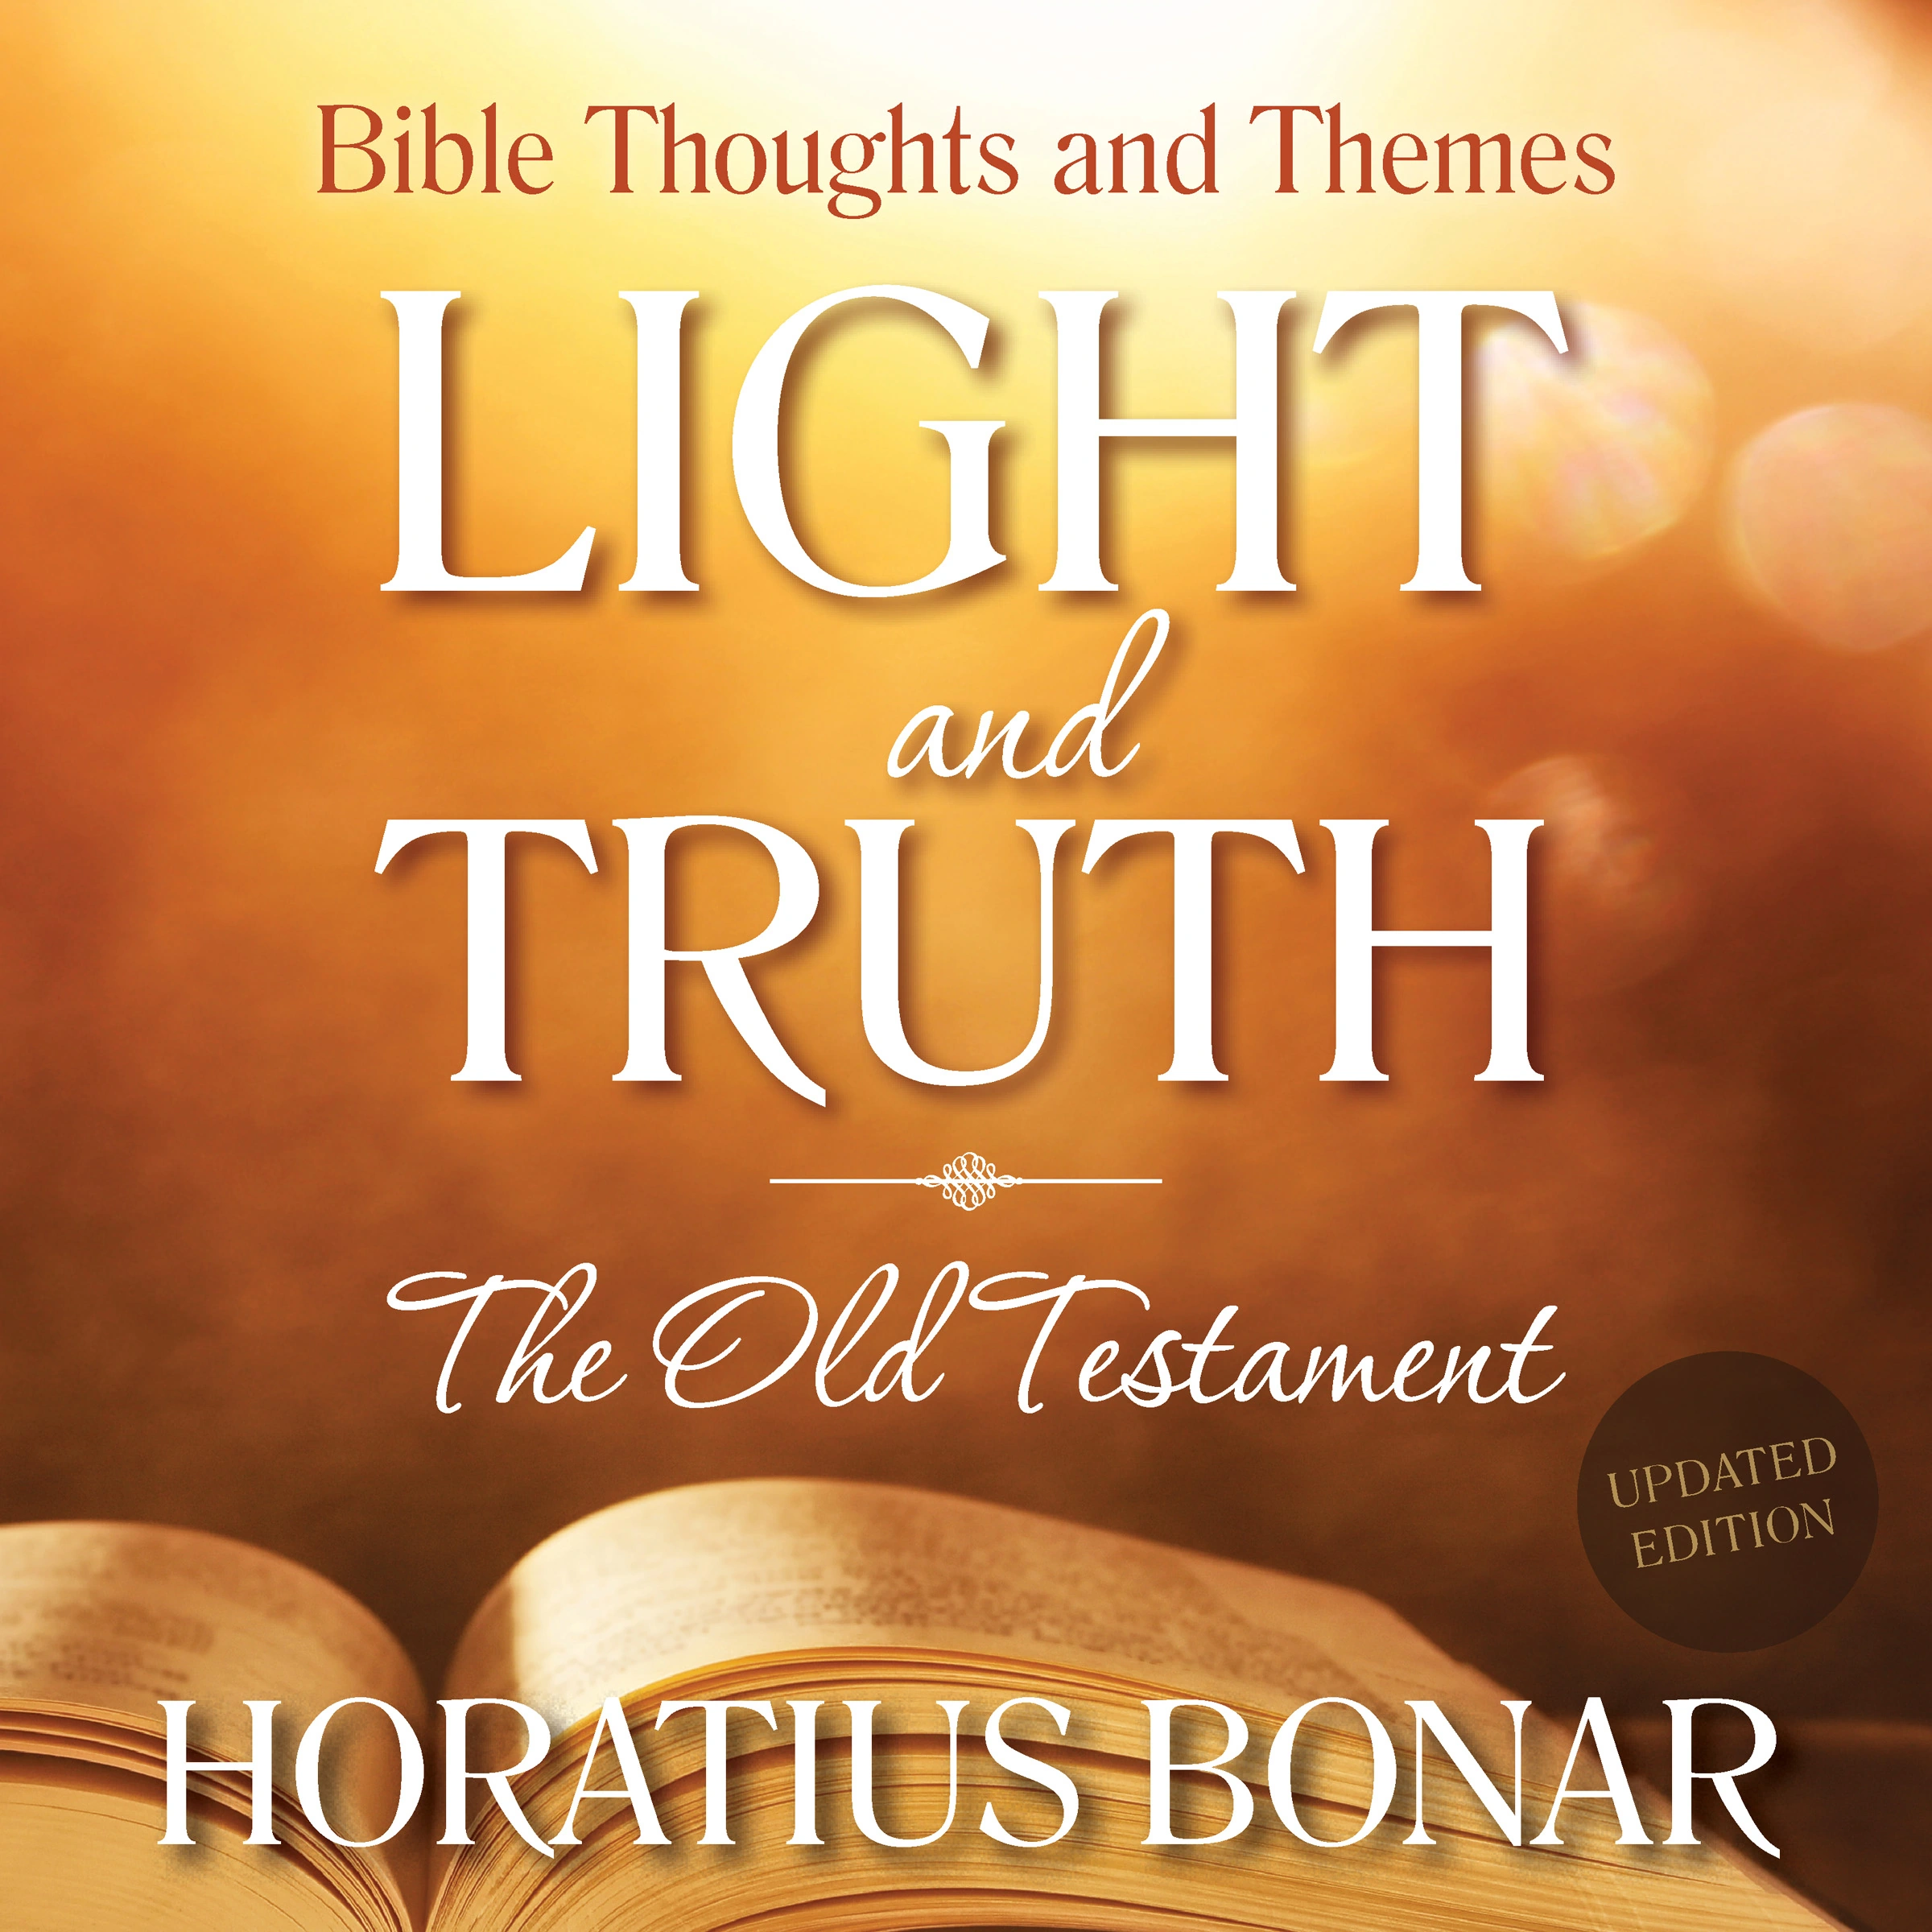 Light and Truth – The Old Testament by Horatius Bonar Audiobook